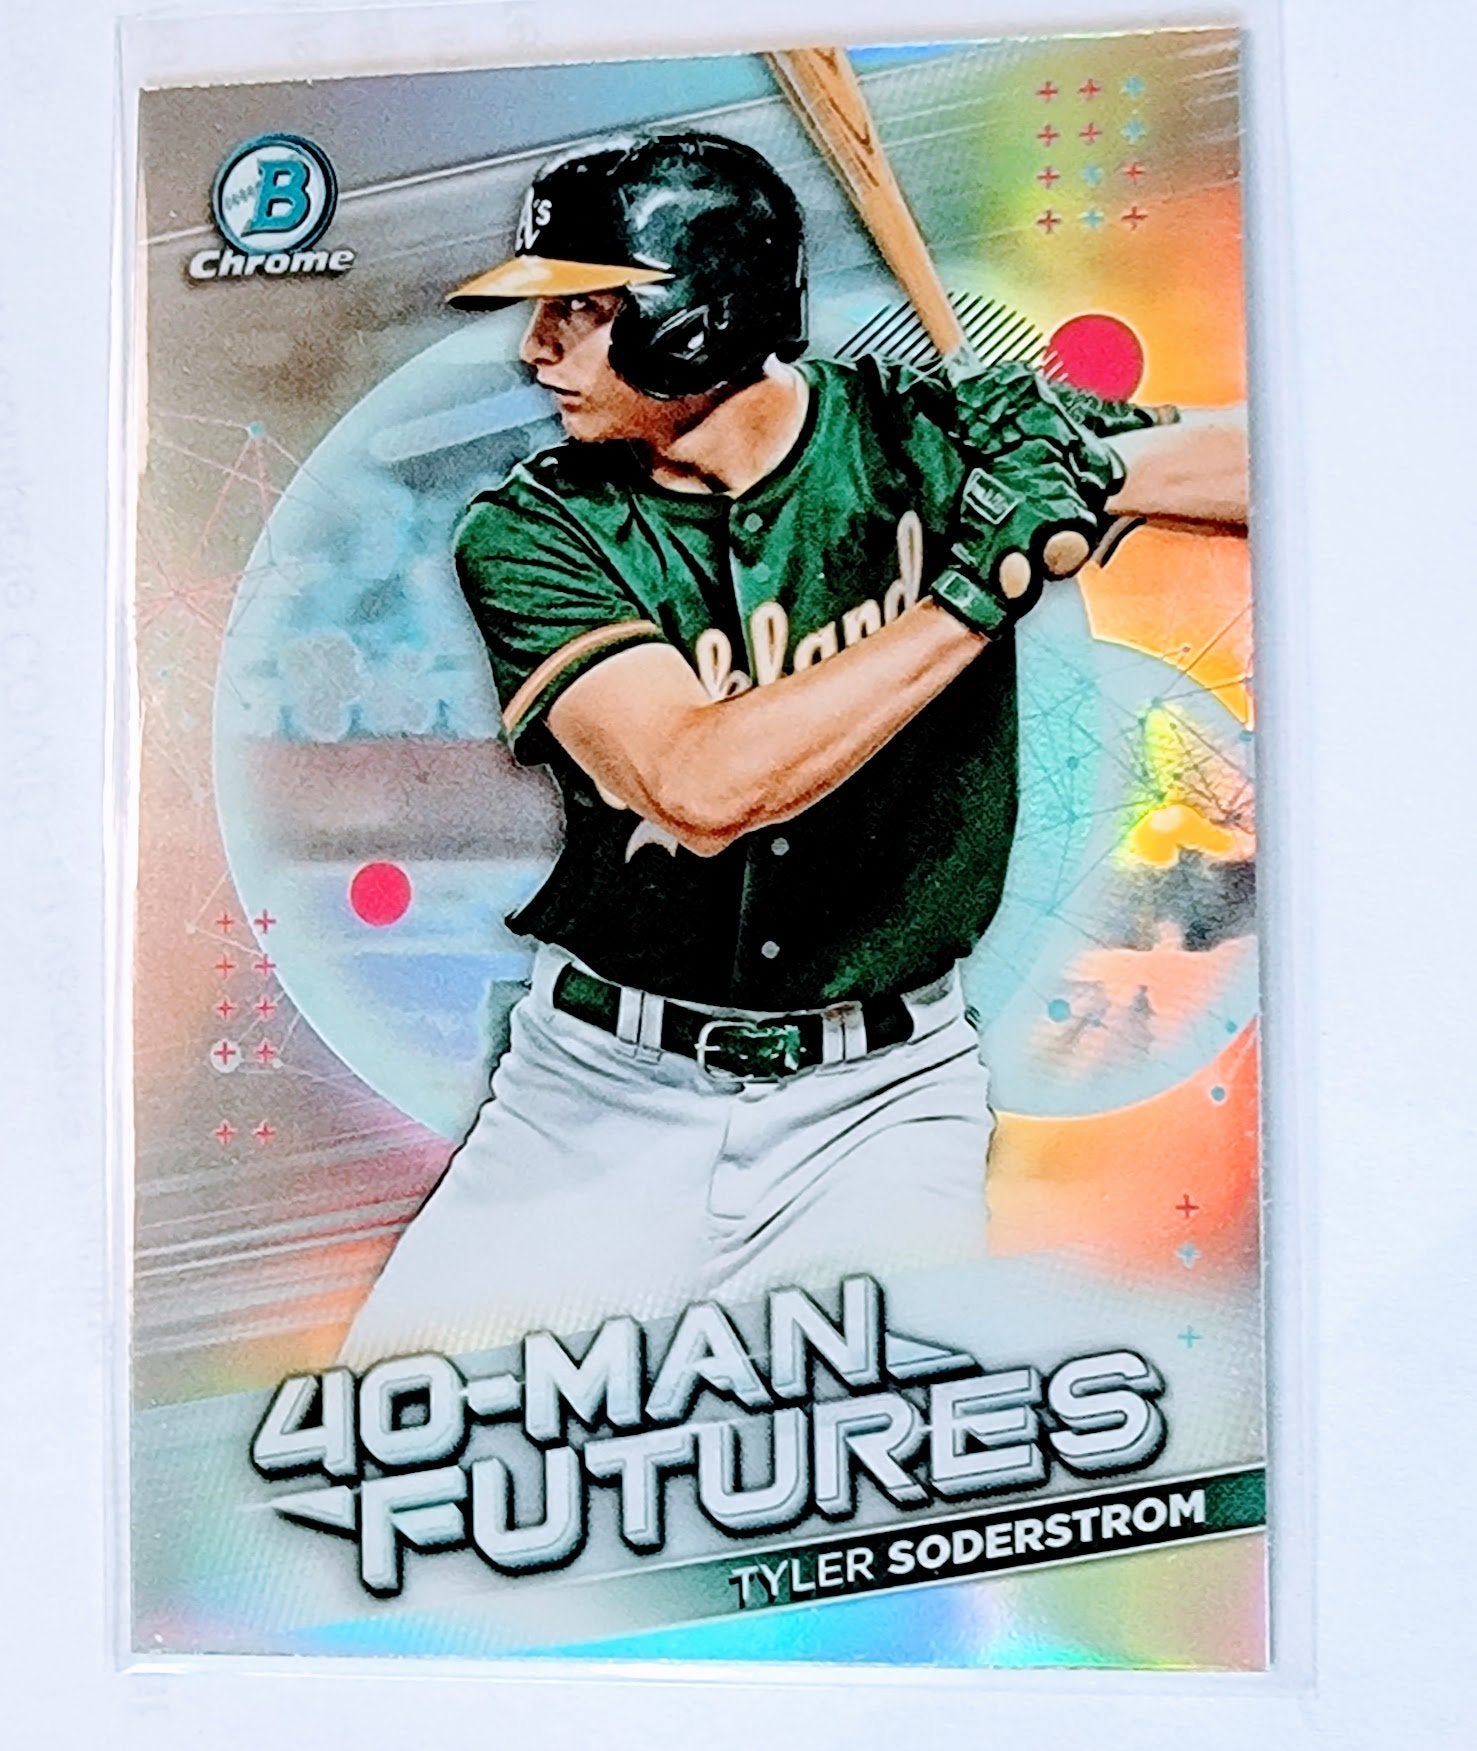 2021 Bowman Chrome Tyler Soderstrom 40 Man Futures Refractor Prospect Baseball Card SMCB1 simple Xclusive Collectibles   